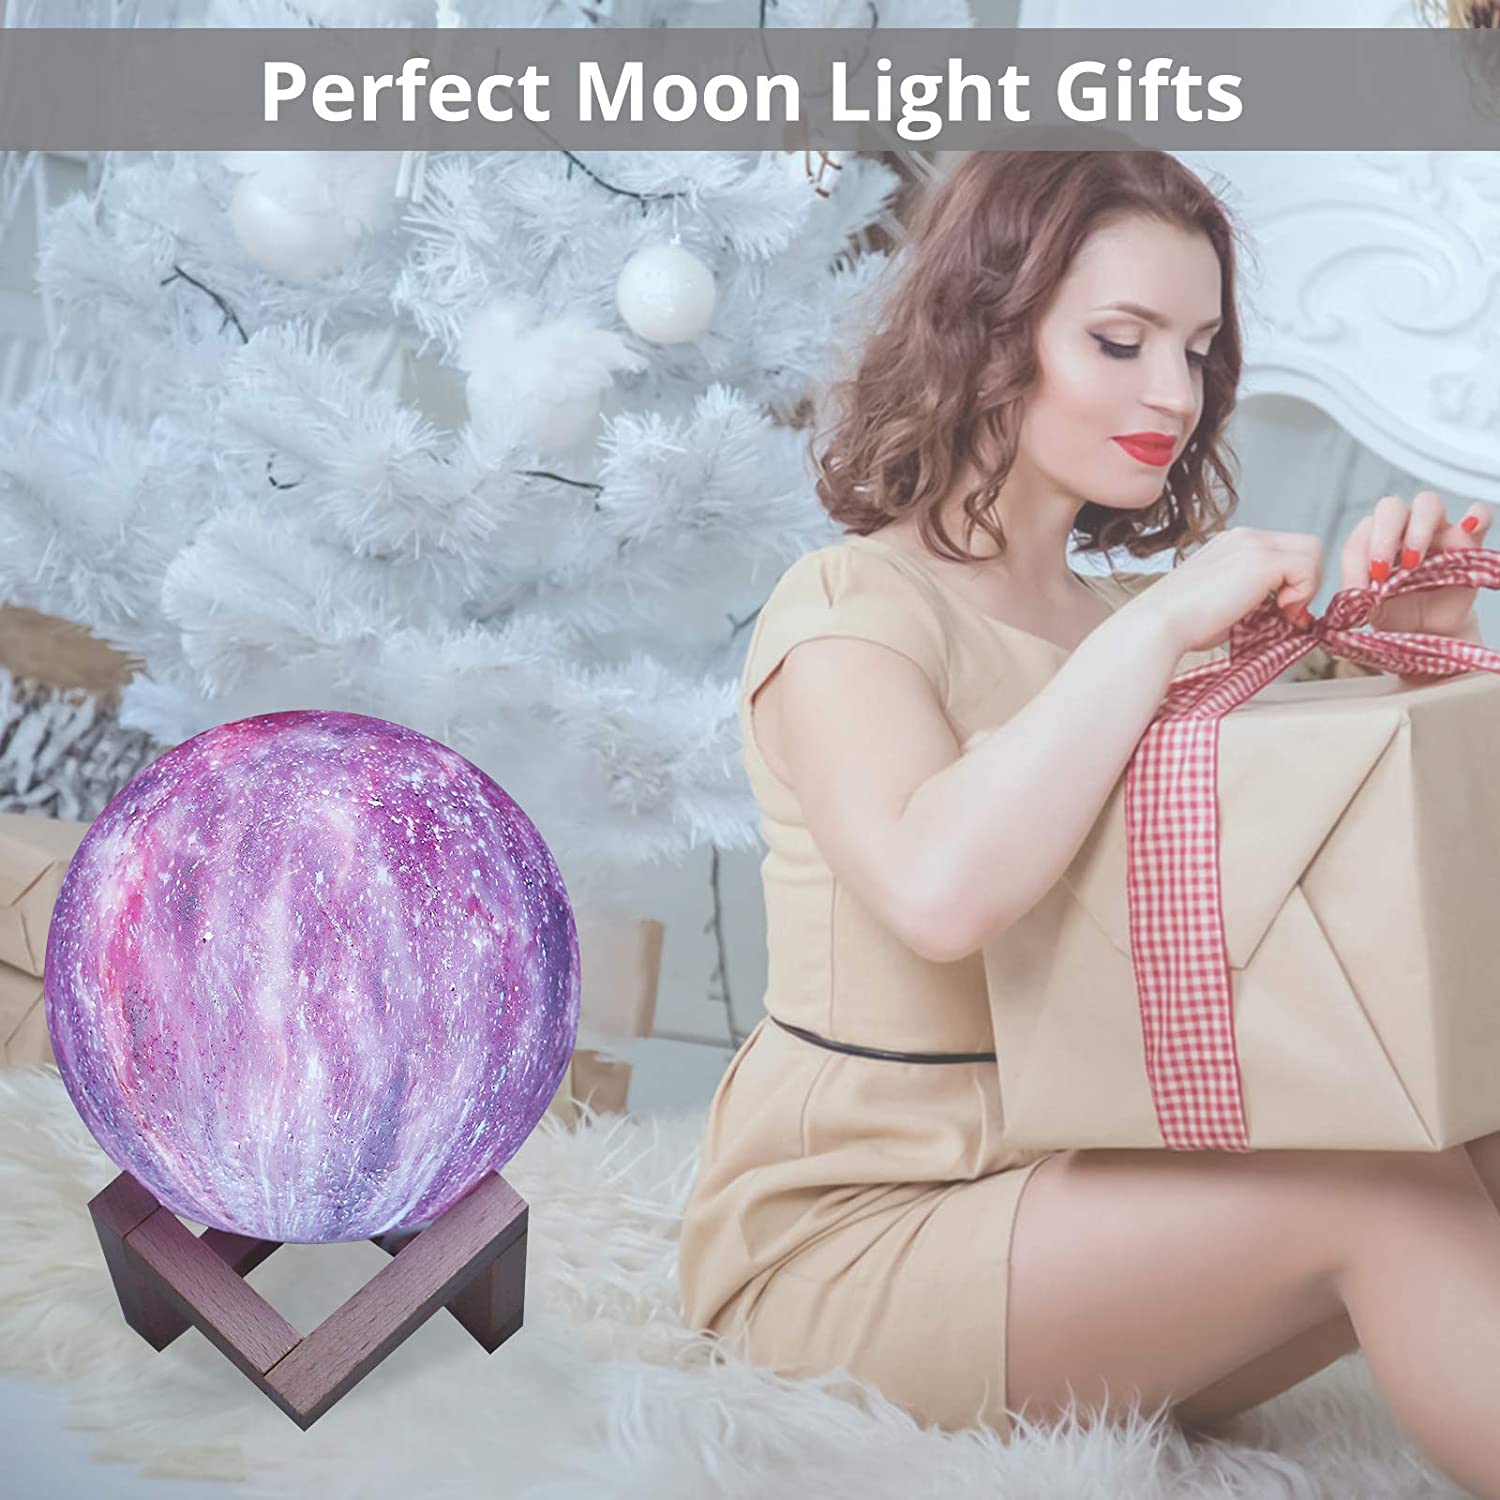 PROZOR Moon Night Light with Stand 5.9inch 3D Moon Lights